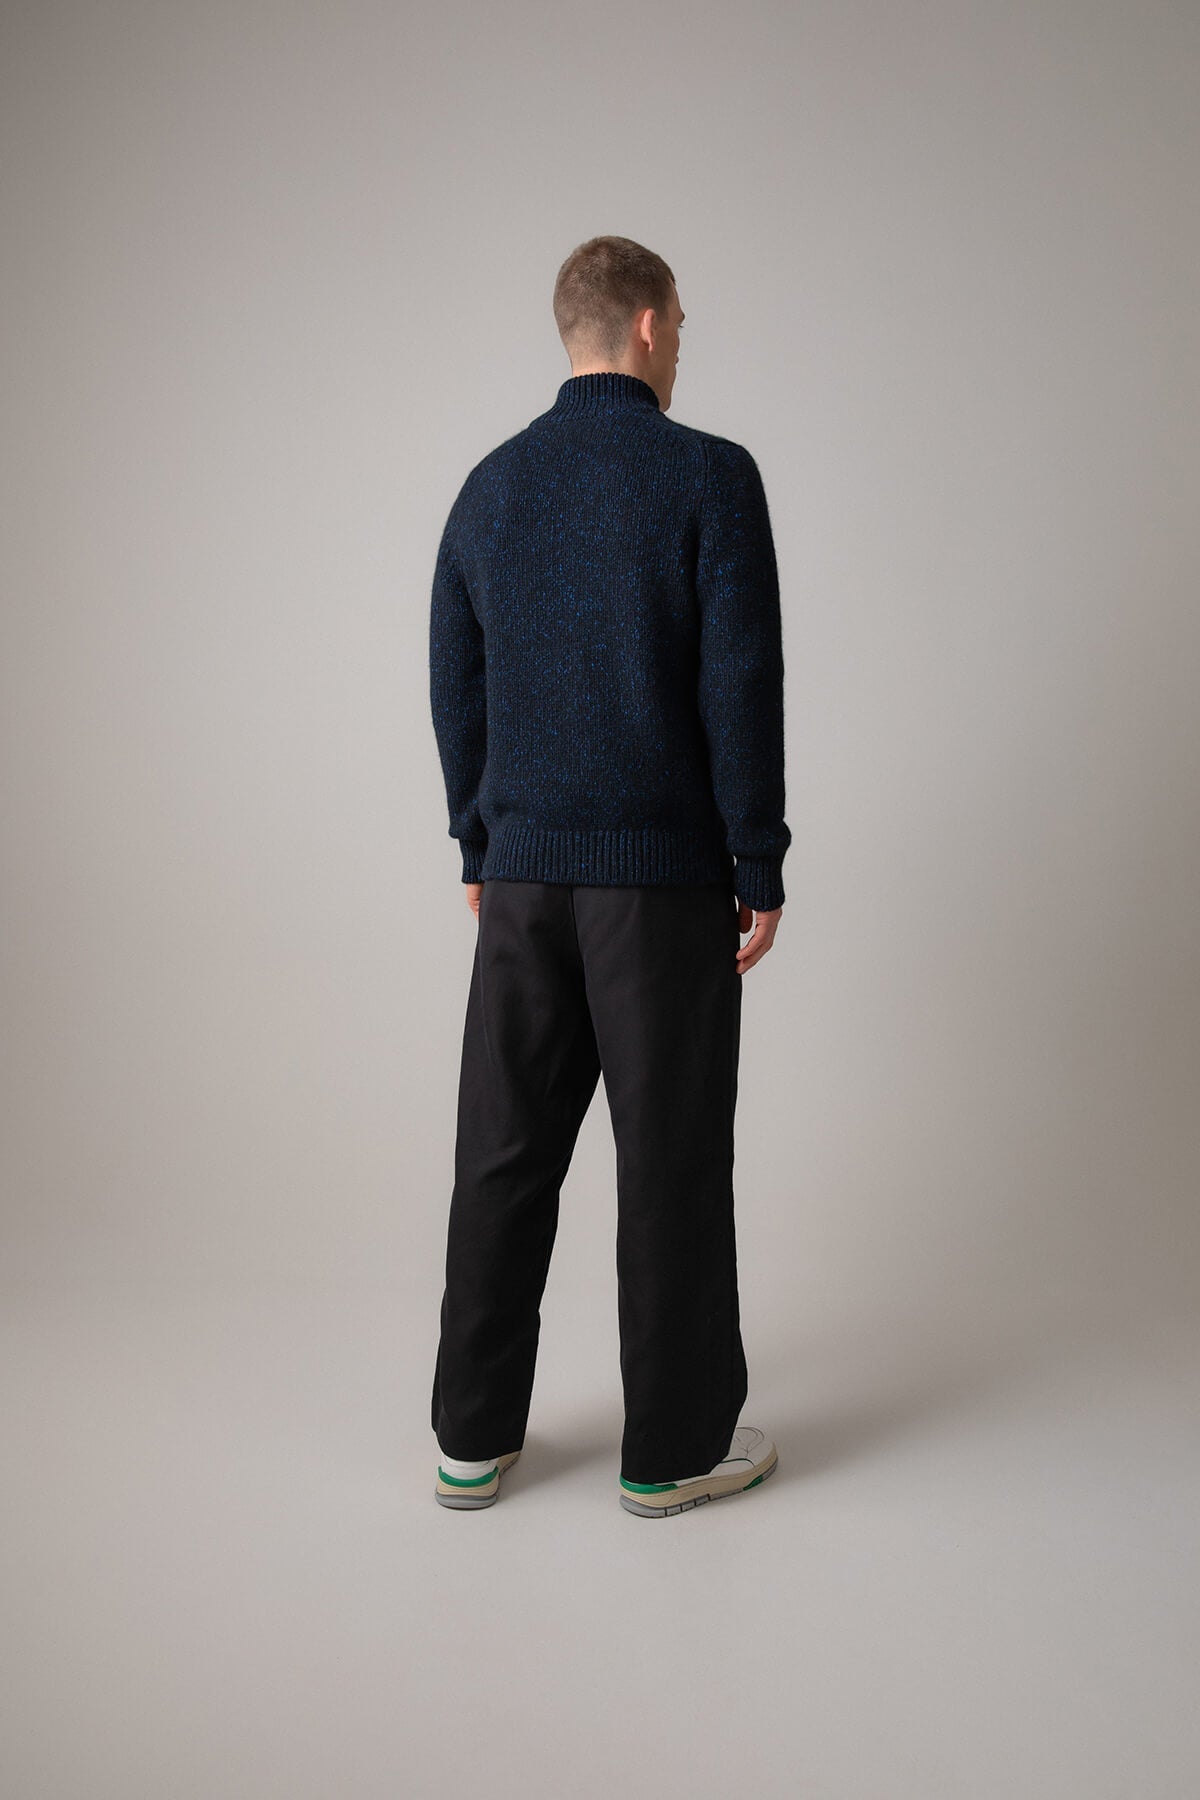 Johnstons of Elgin’s Men's Cashmere Donegal Zip Turtle Neck Cardigan in Dark Navy on model wearing black trousers on a grey background KAB05115Q23712